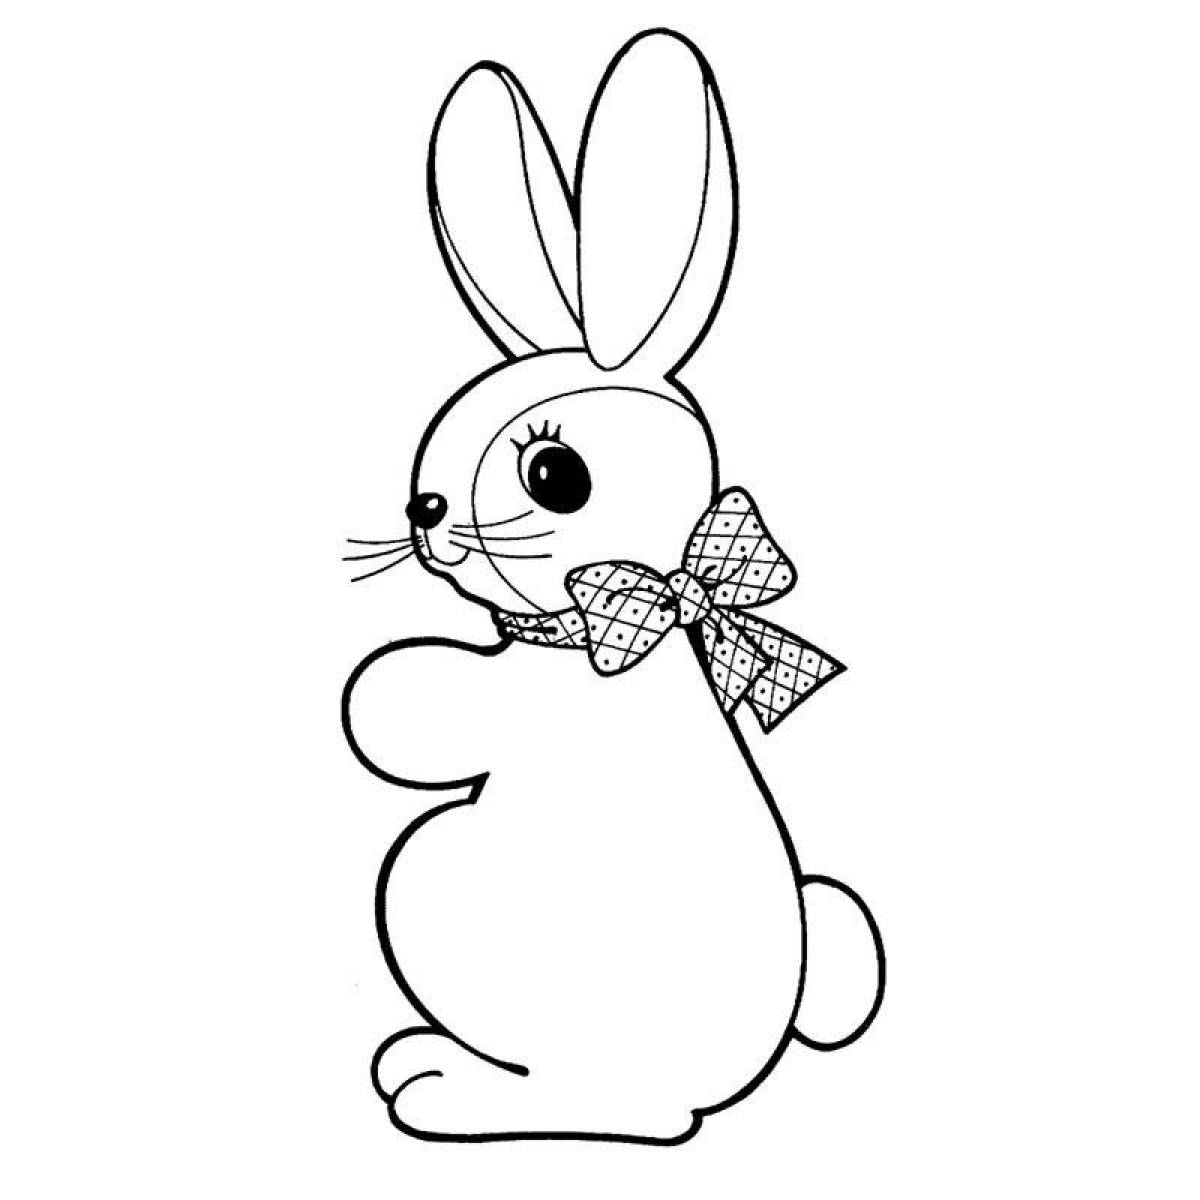 Sparkling Christmas Bunny Coloring Page